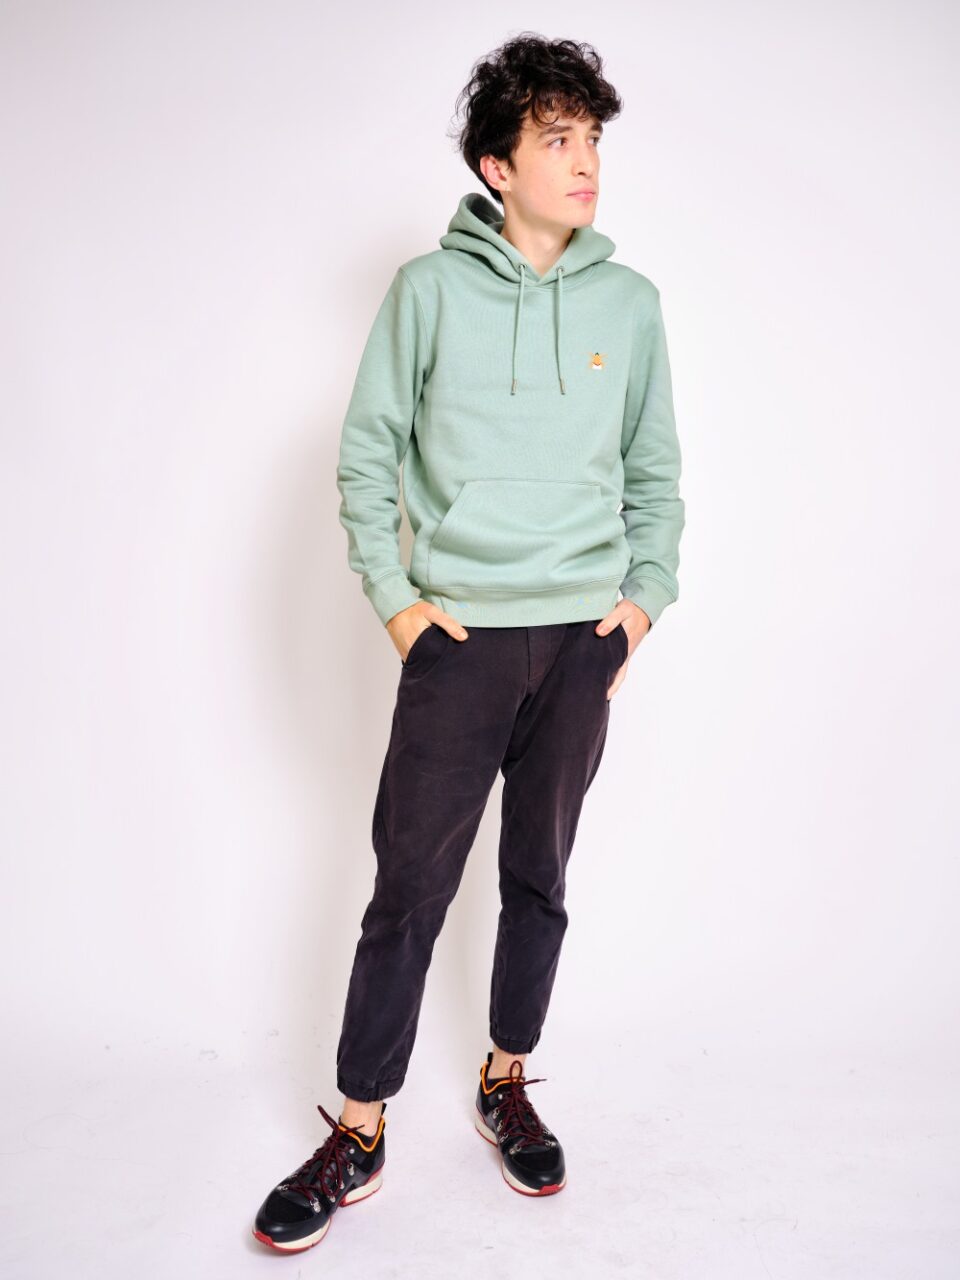 STROM Clothing - Hoodie - Japan Collection